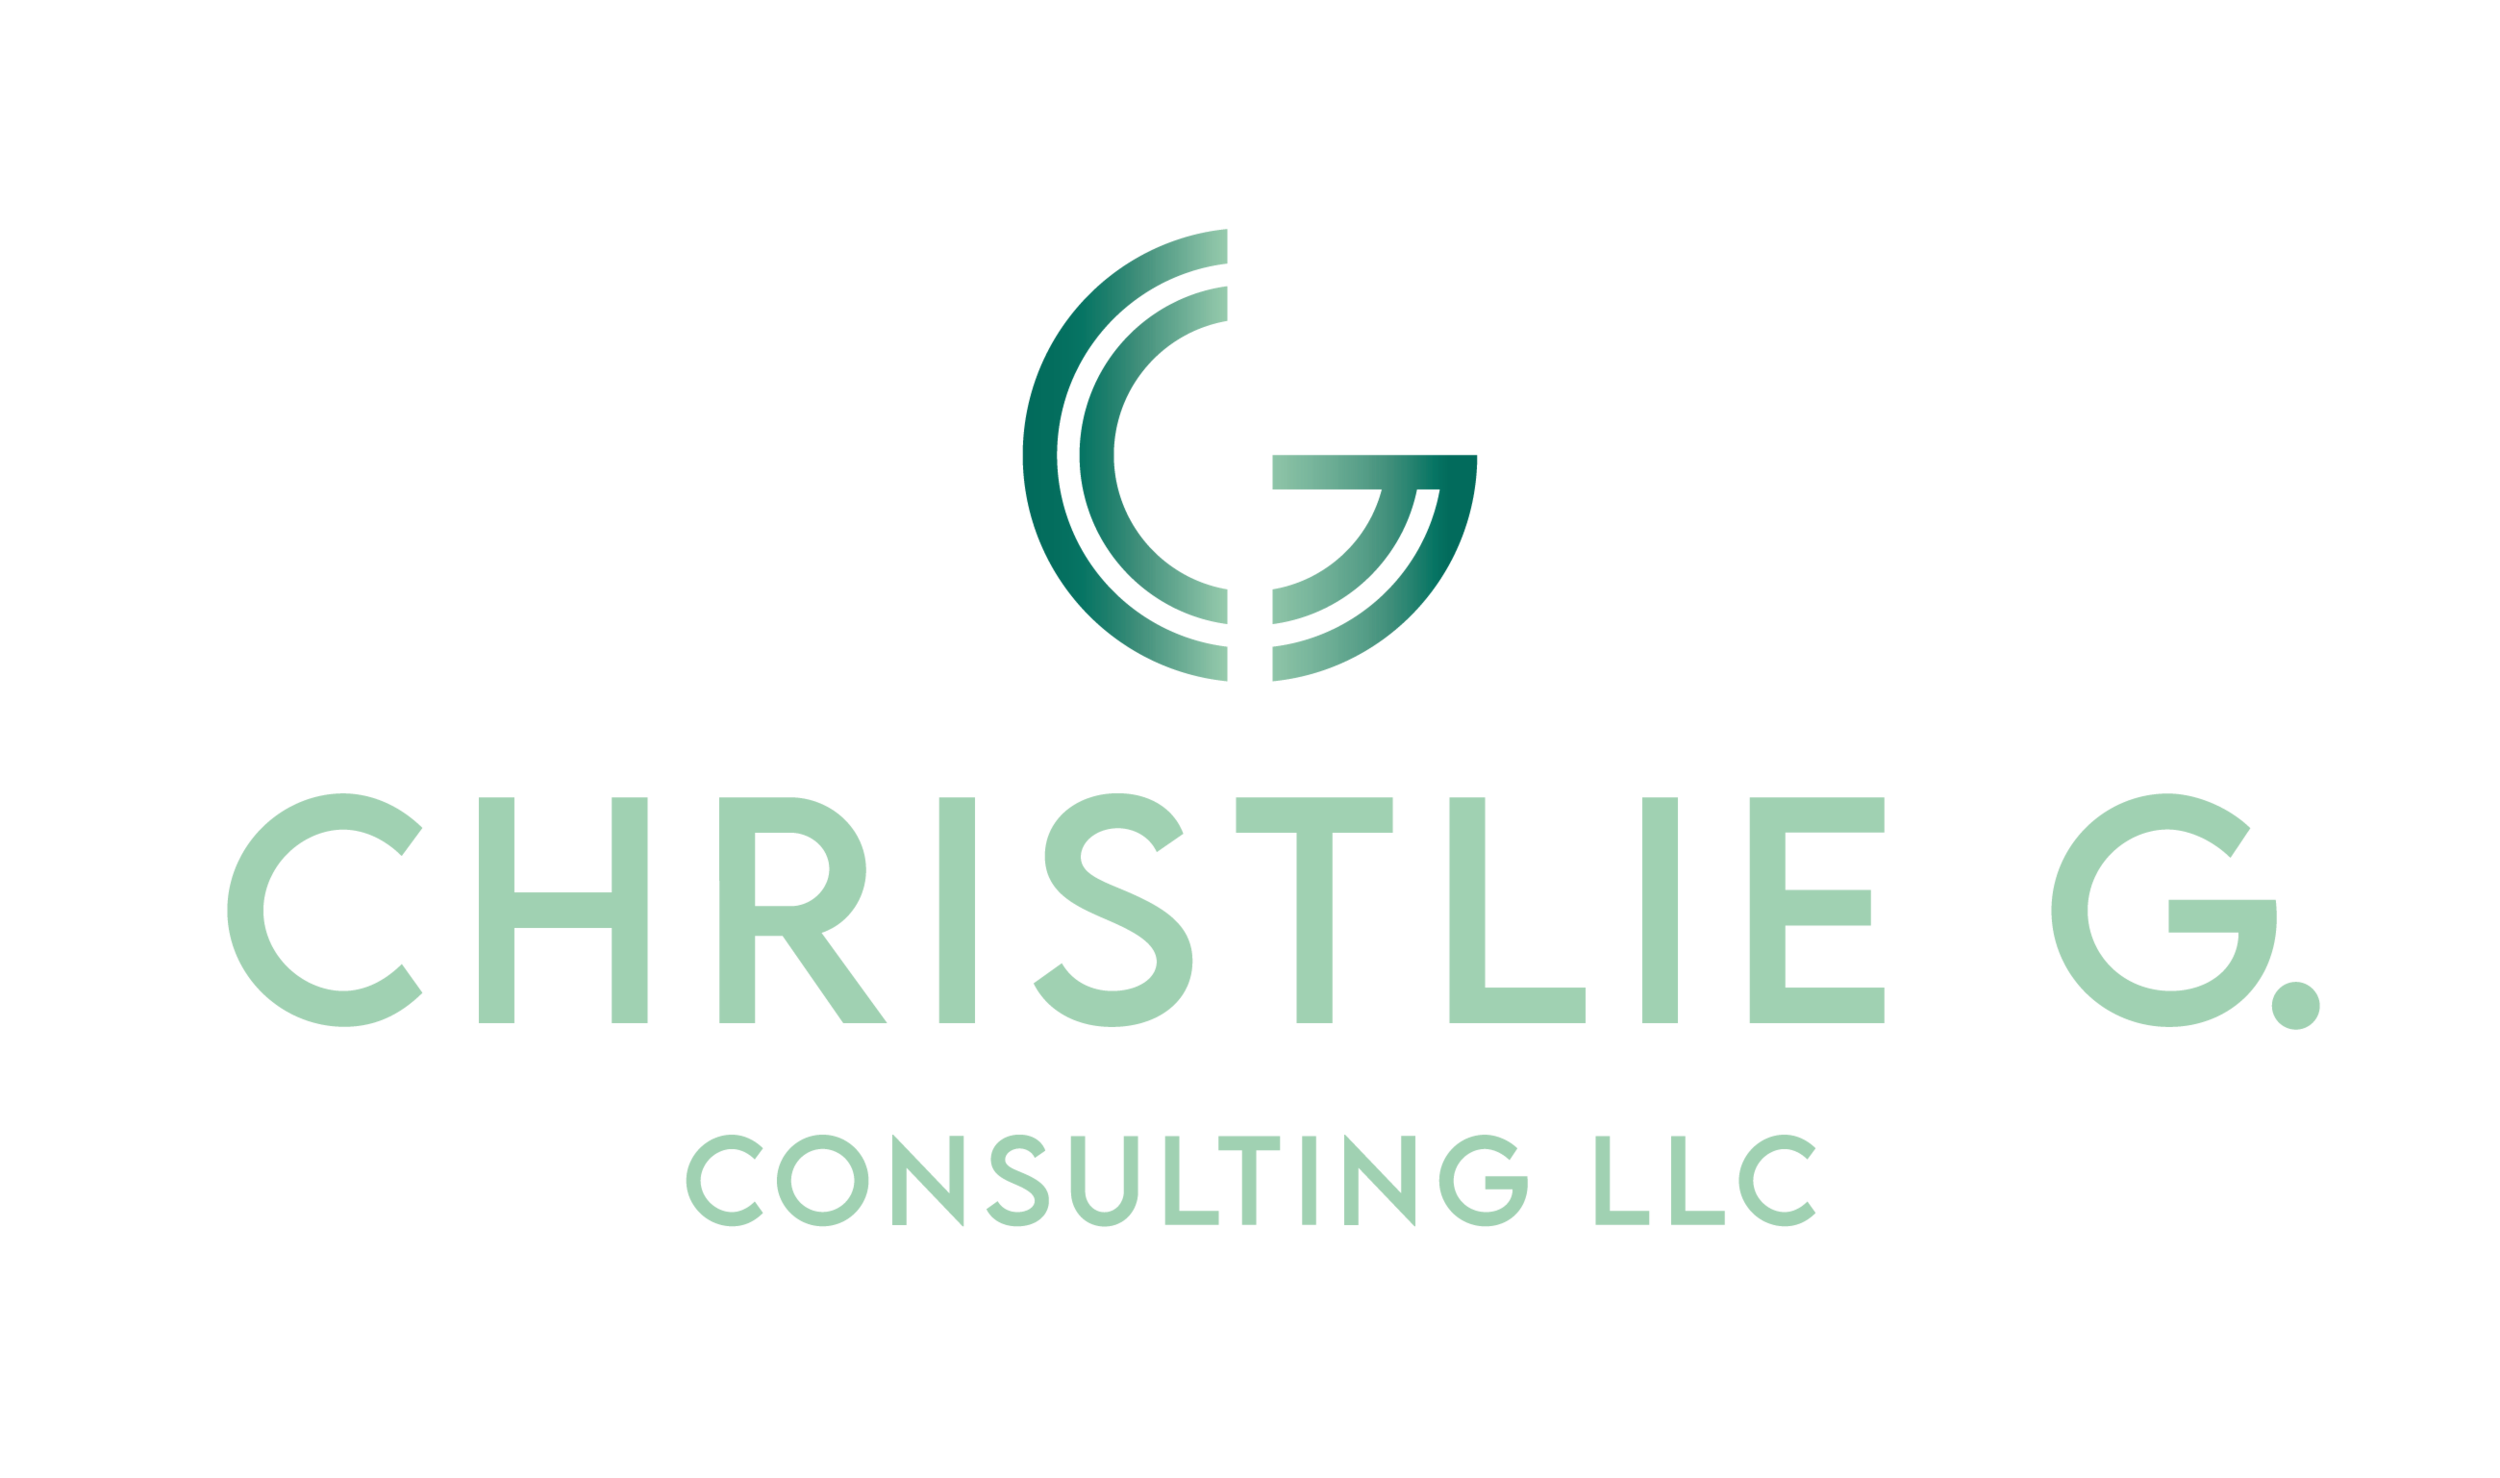 Christlie G. Consulting